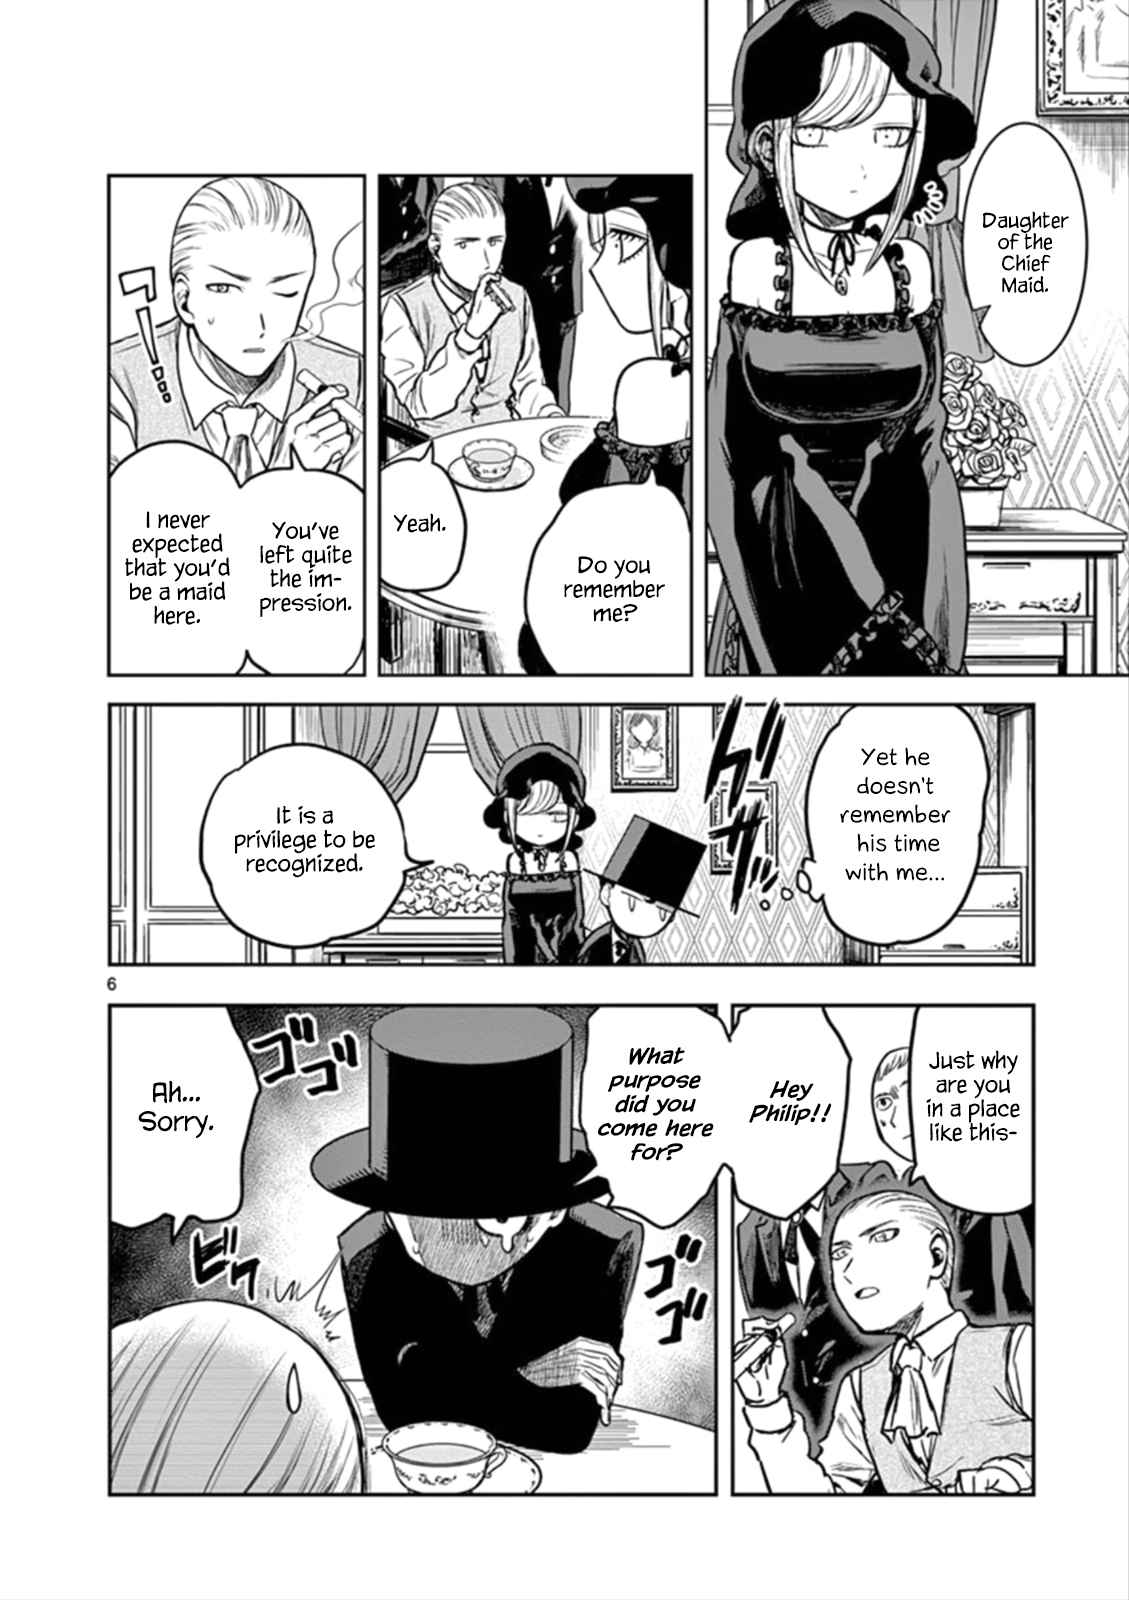 The Duke of Death and his Black Maid Ch.3